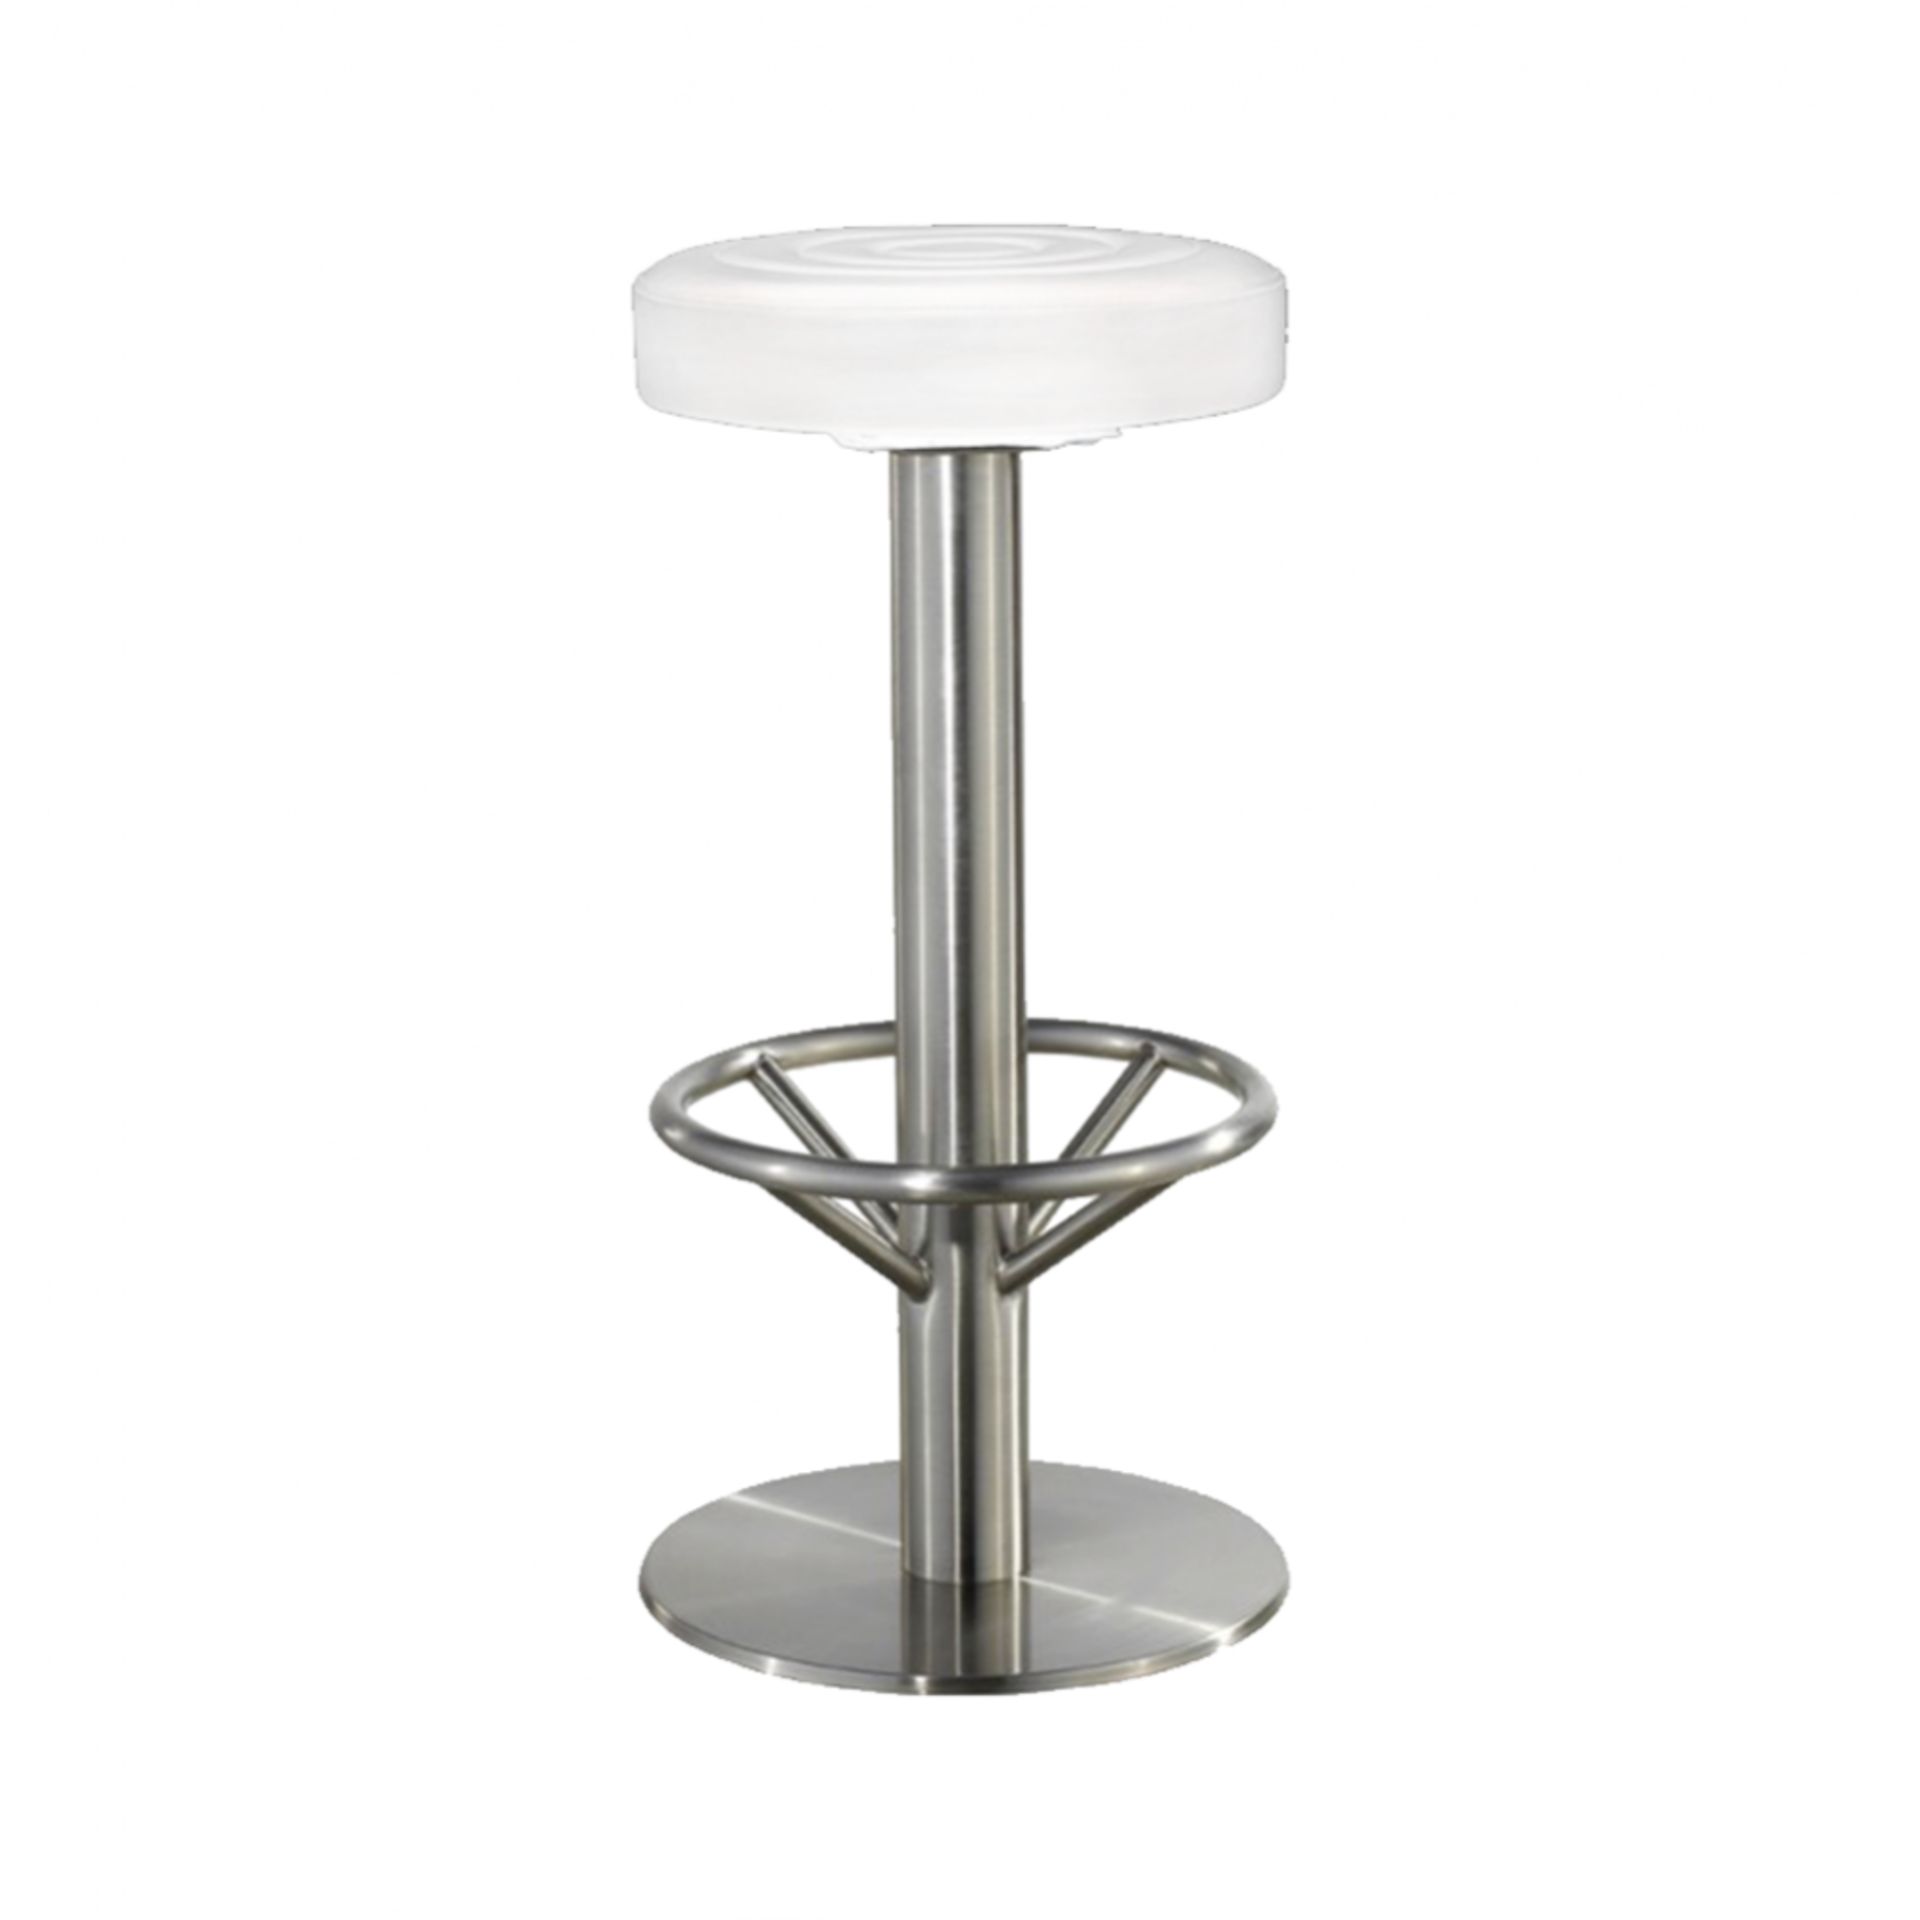 New/Boxed: Galvin- RF Bar Stool in Brushed Stainless Steel & White Faux Leather Padded Seat. Model